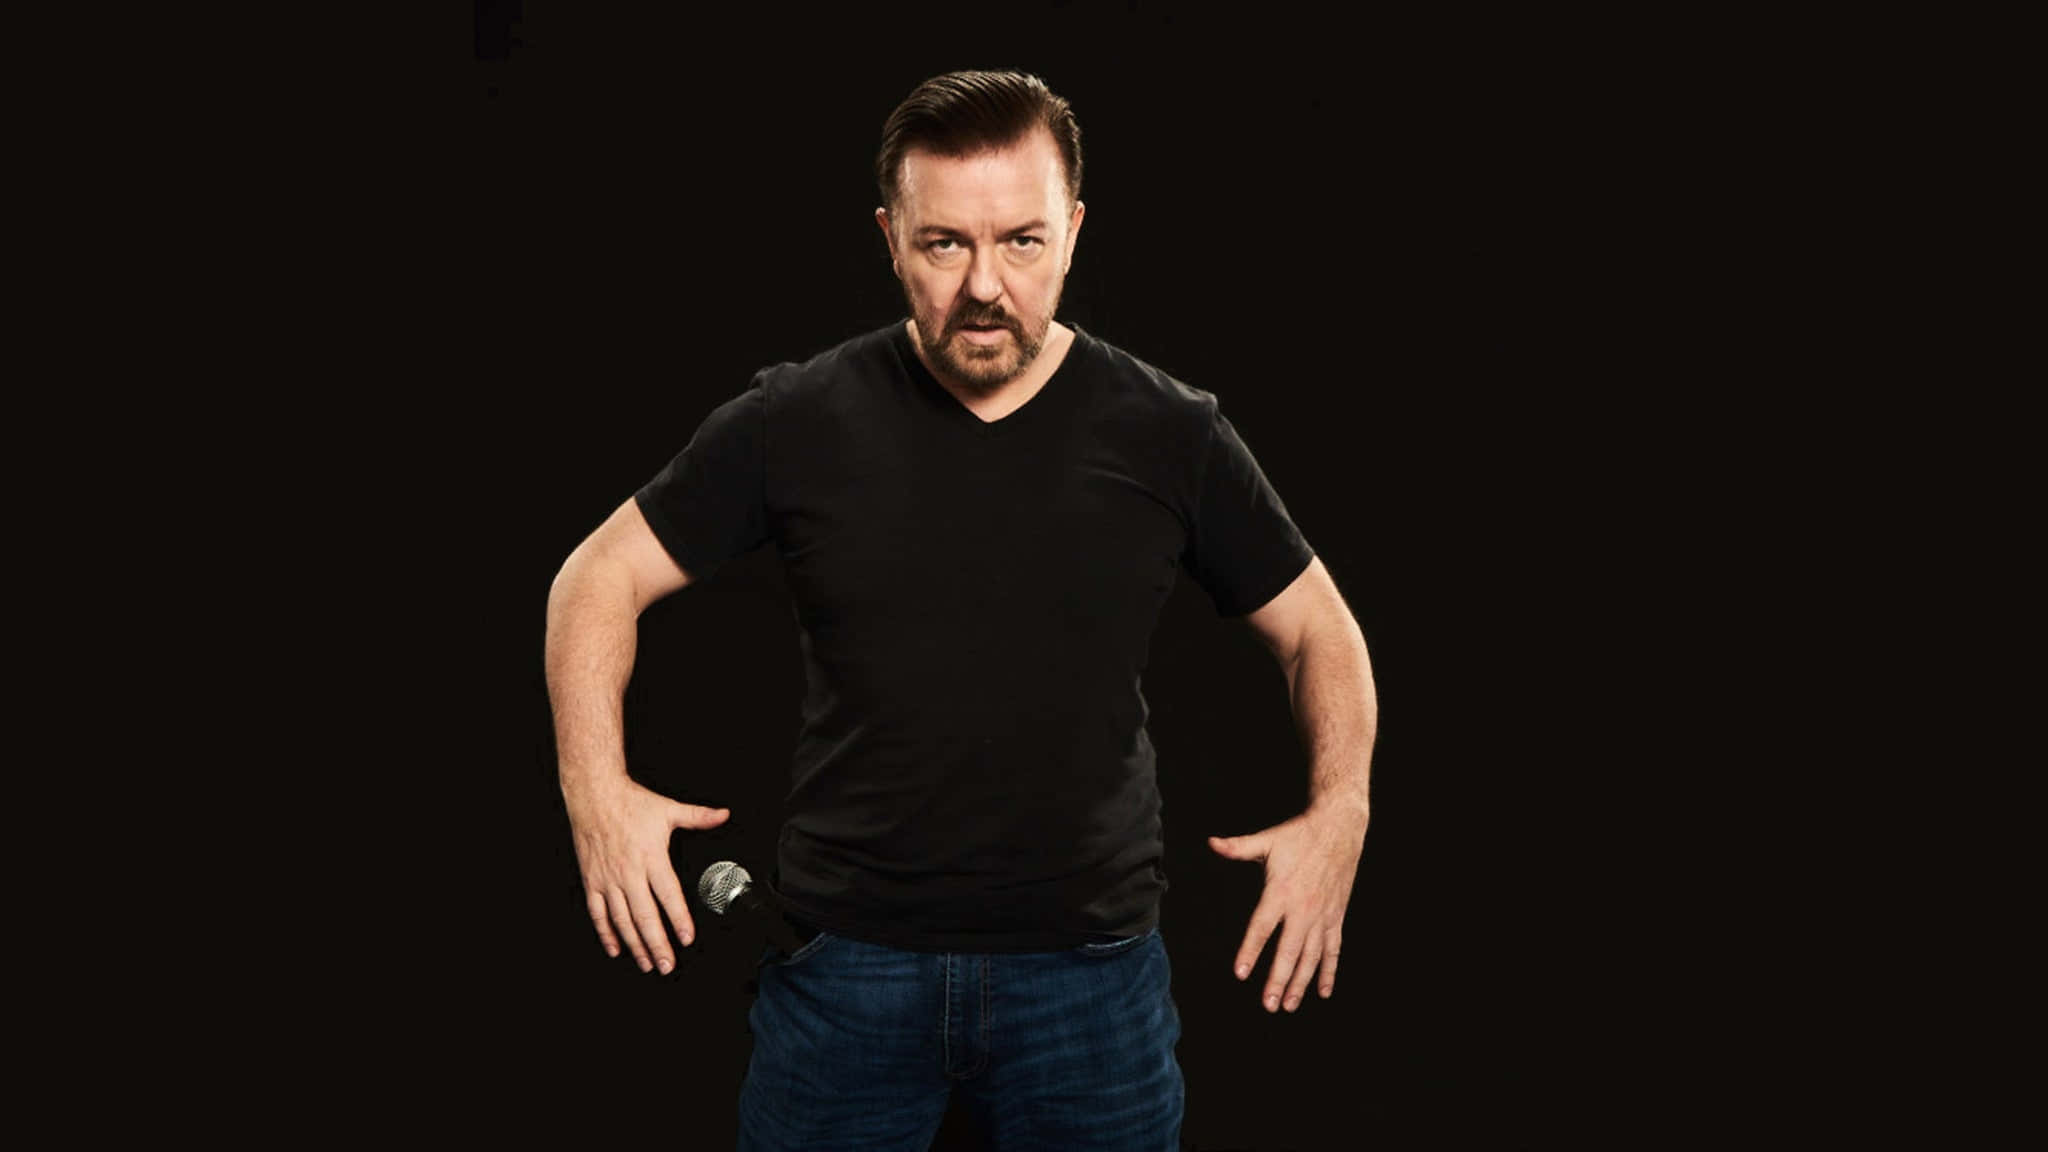 Comedian Ricky Gervais Laughing at a Comedy Event Wallpaper